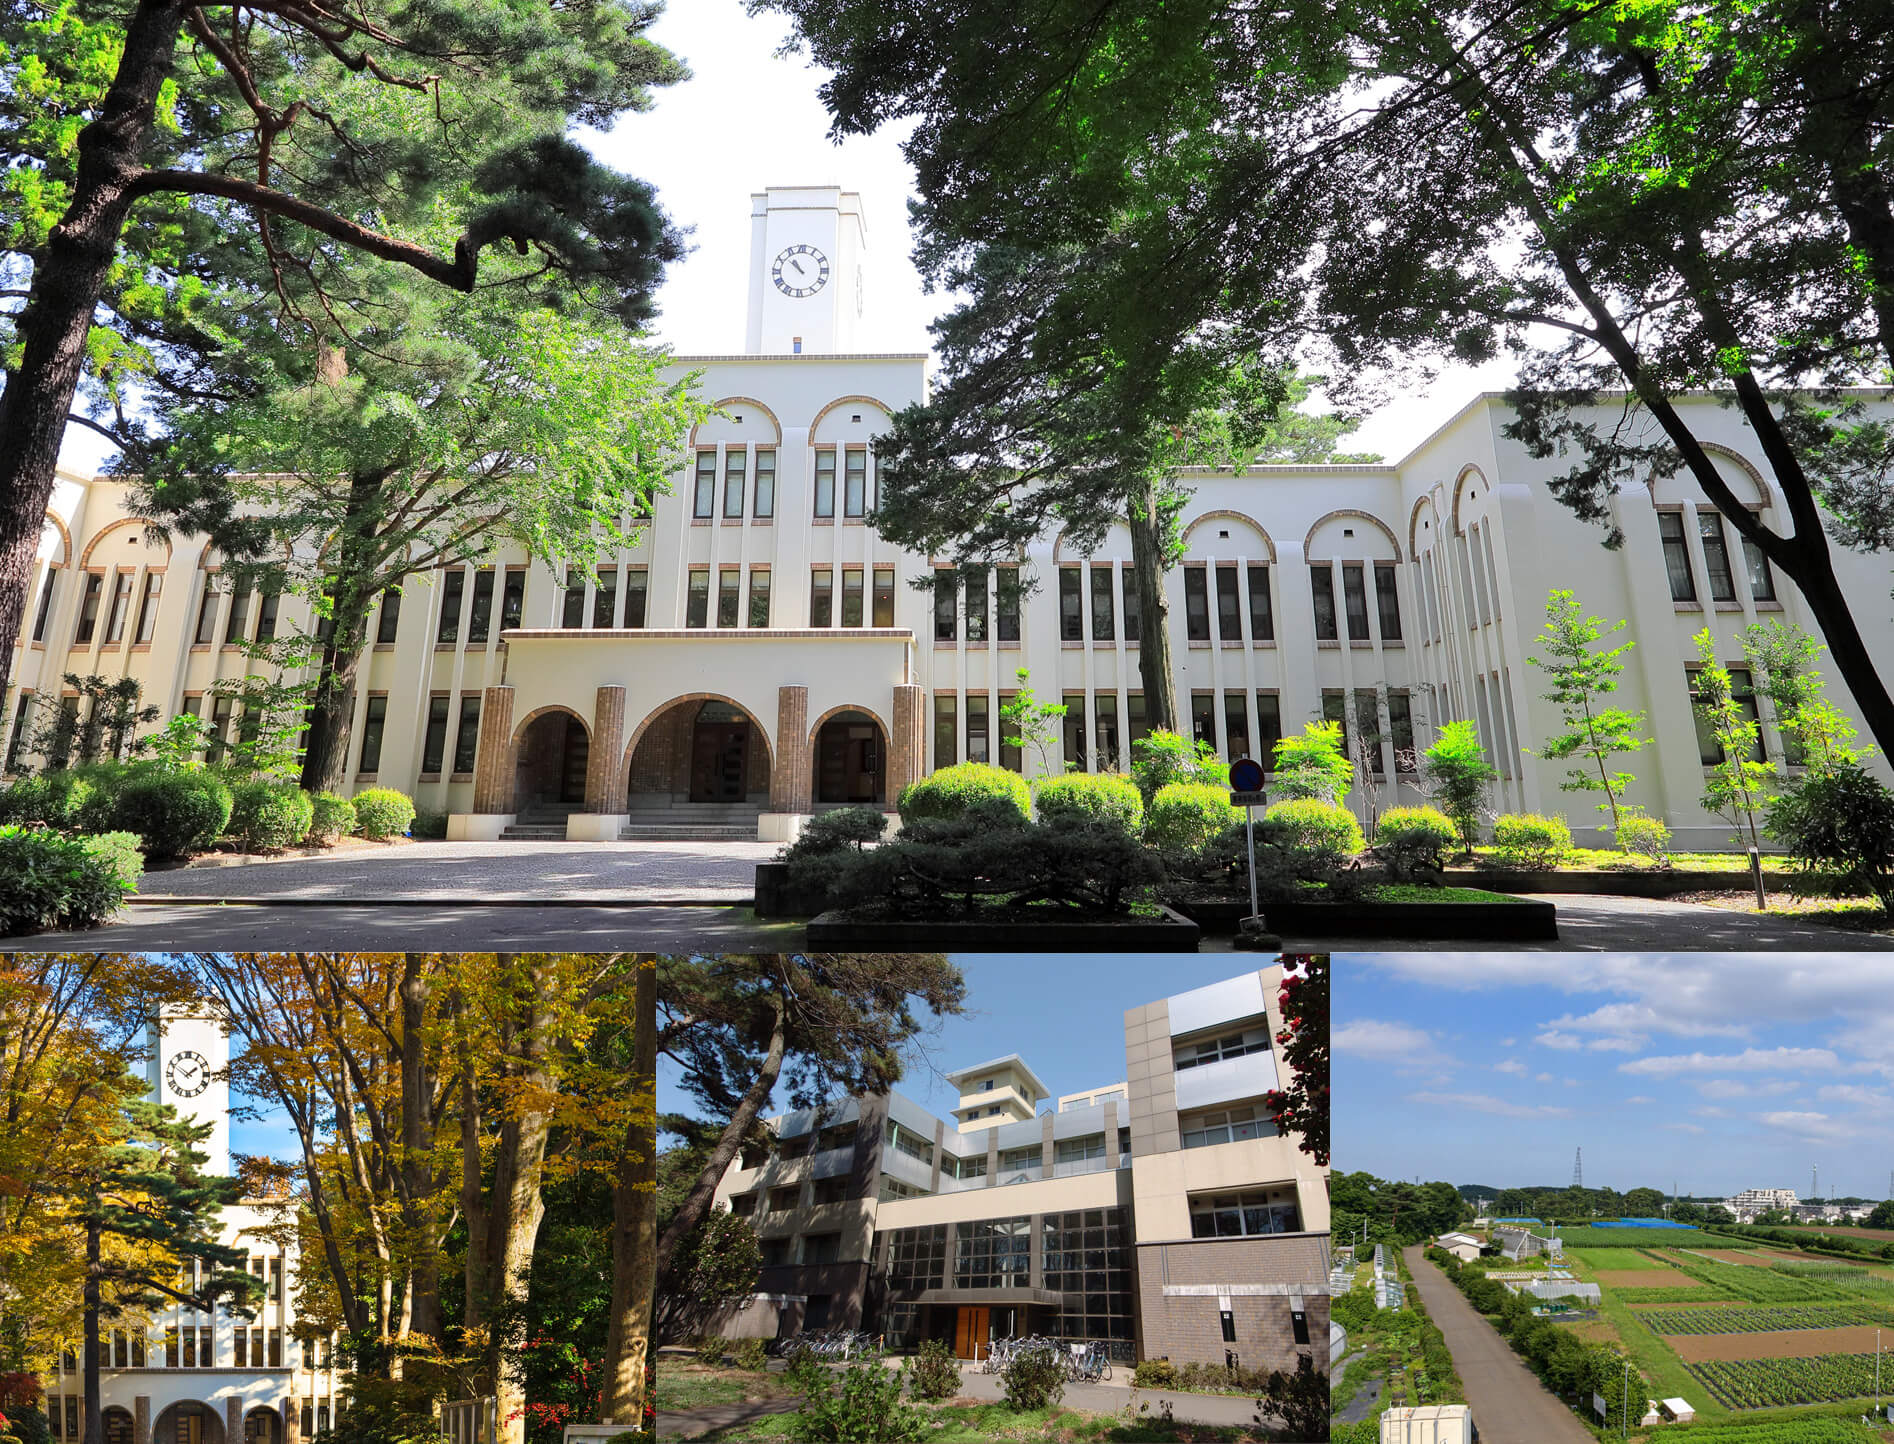 Yohei Okada’s website Tokyo University of Agriculture and Technology